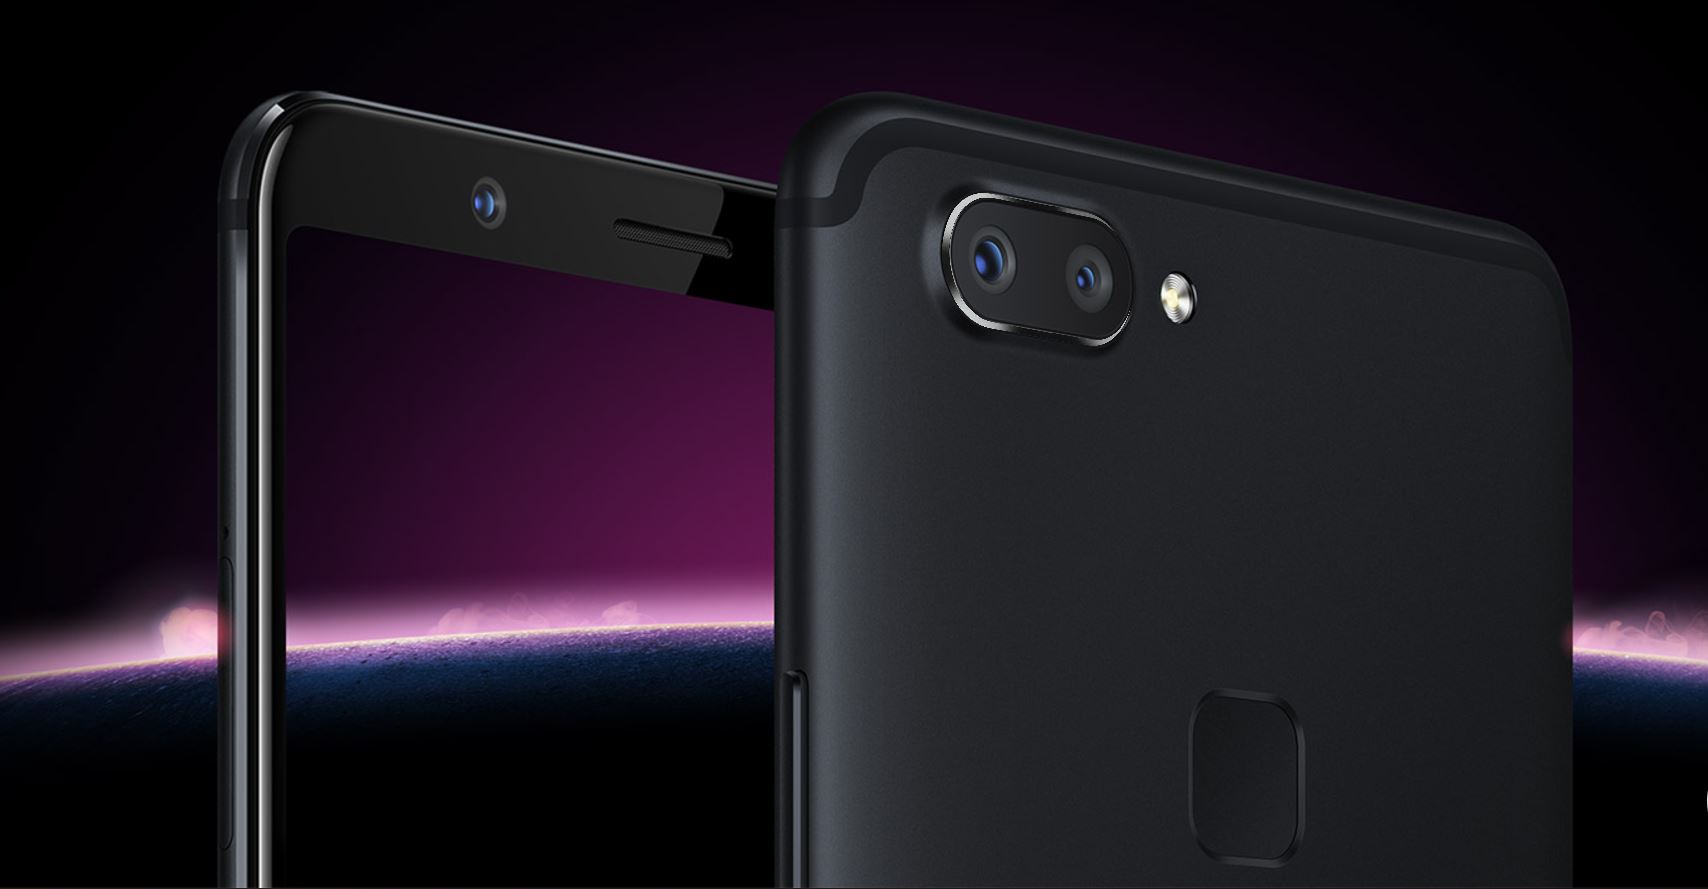 Vivo launches X20 and X20 Plus in China with Dual-Camera and FullView display 1